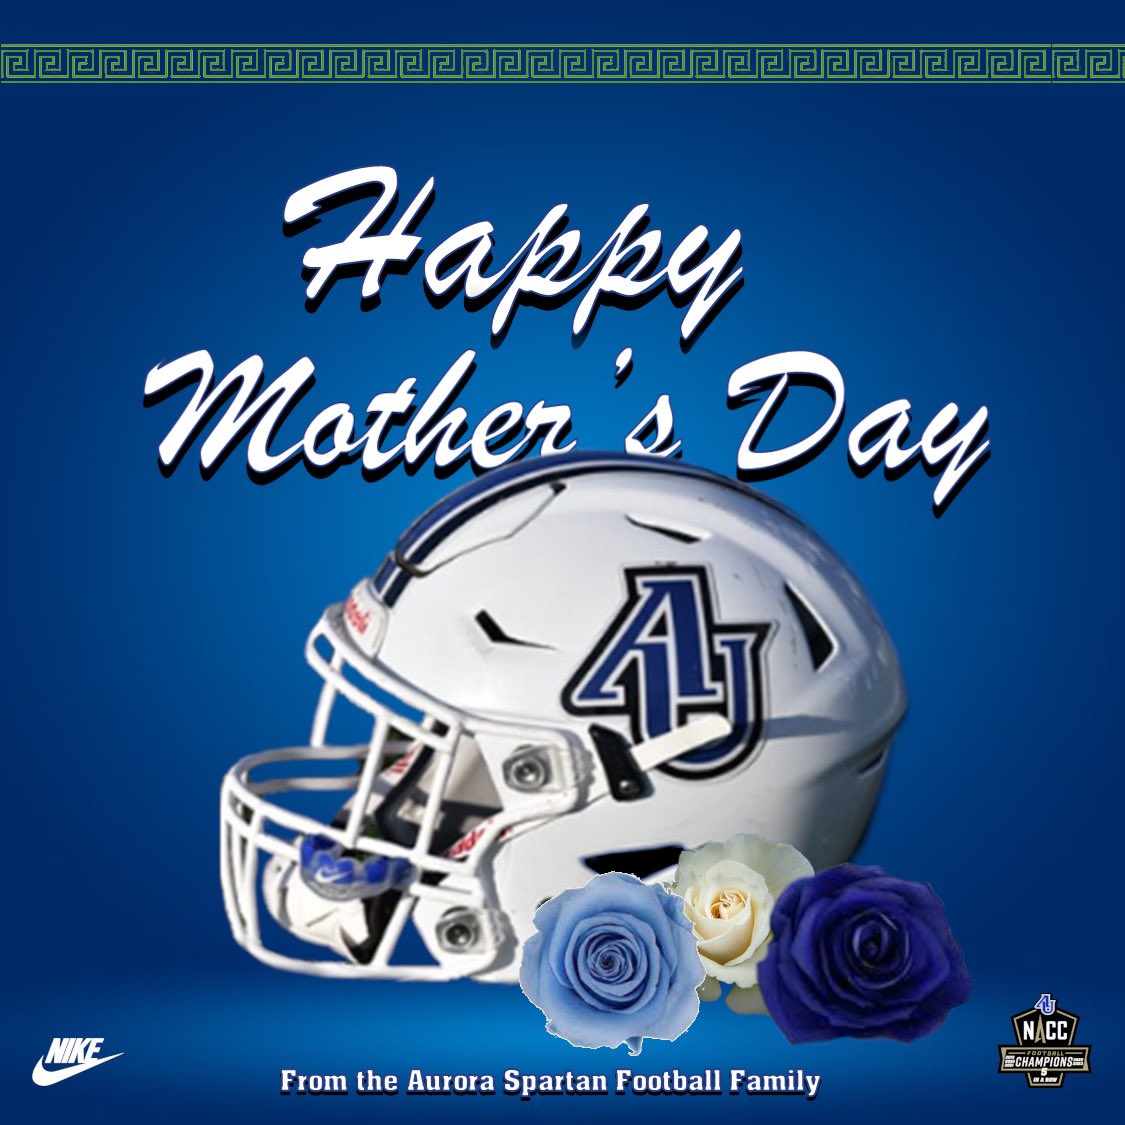 Happy Mother’s Day to all of our amazing Spartan Moms out there! We hope you have a great day! #weareoneAU